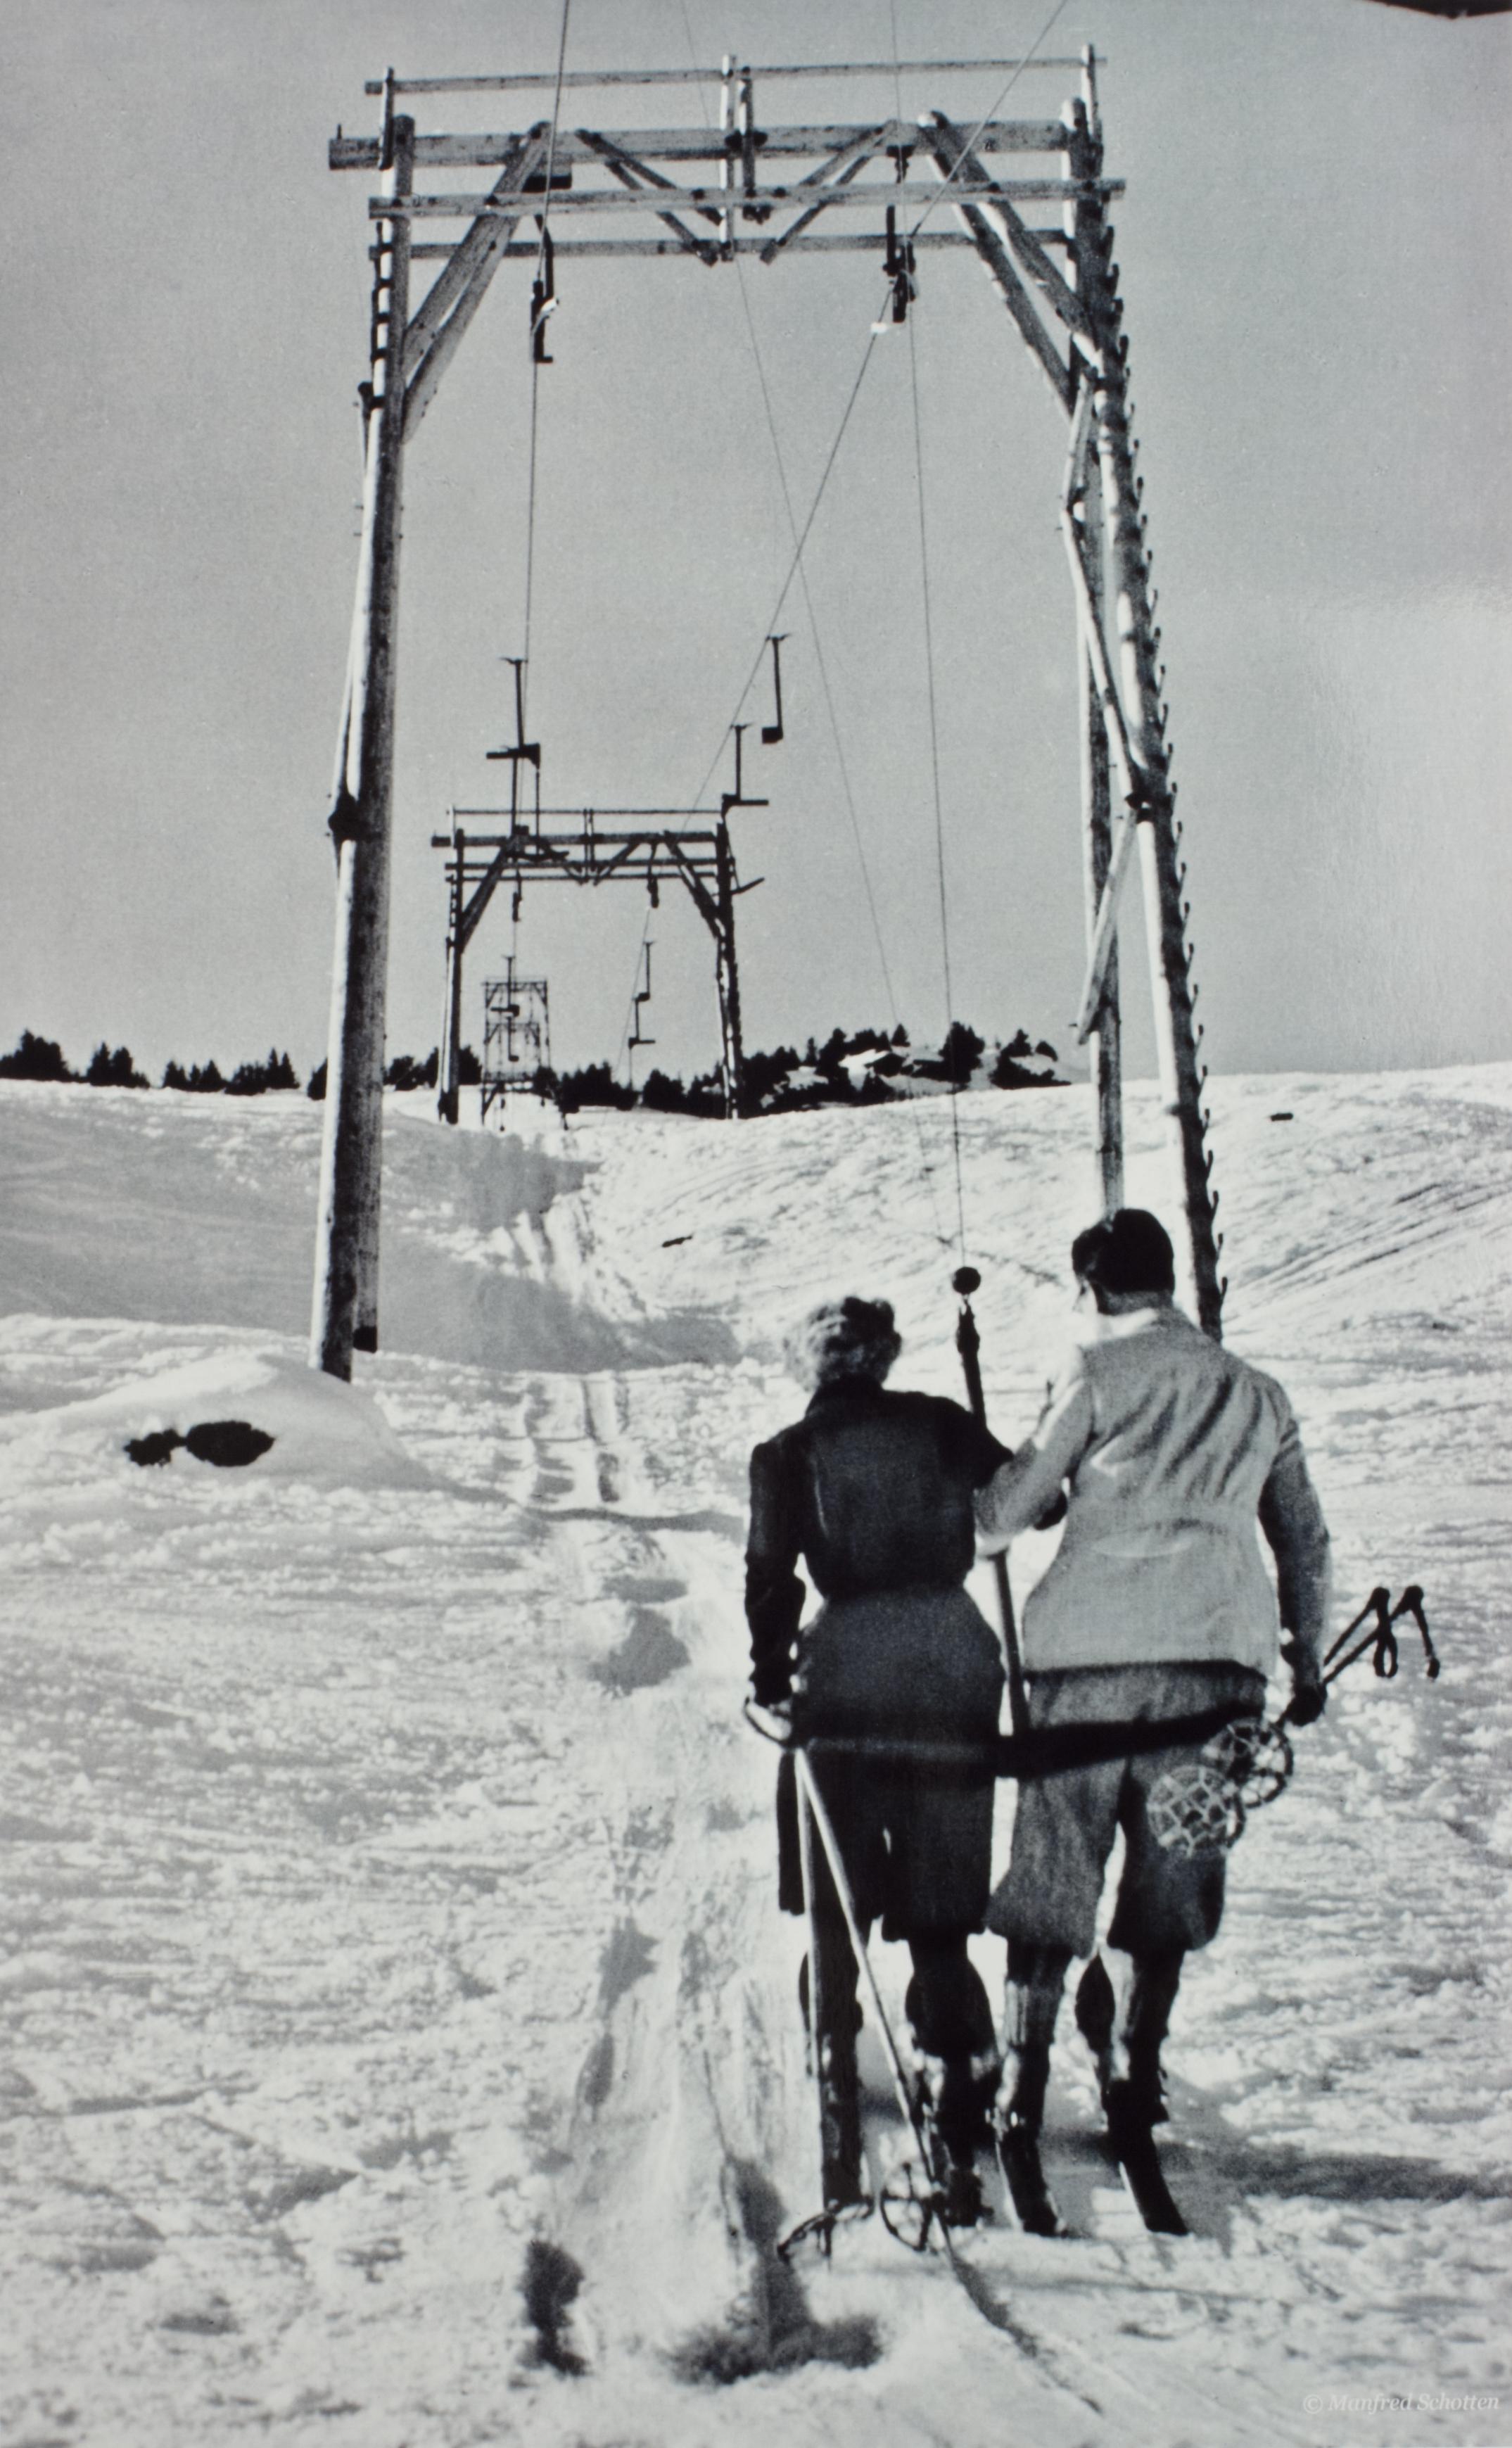 Vintage, antique Alpine Ski photograph.
'THE LIFT', a new mounted black and white photographic image after an original 1930s skiing photograph. Prior to being a recreational activity skiing was purely a means of travelling from A to B through the